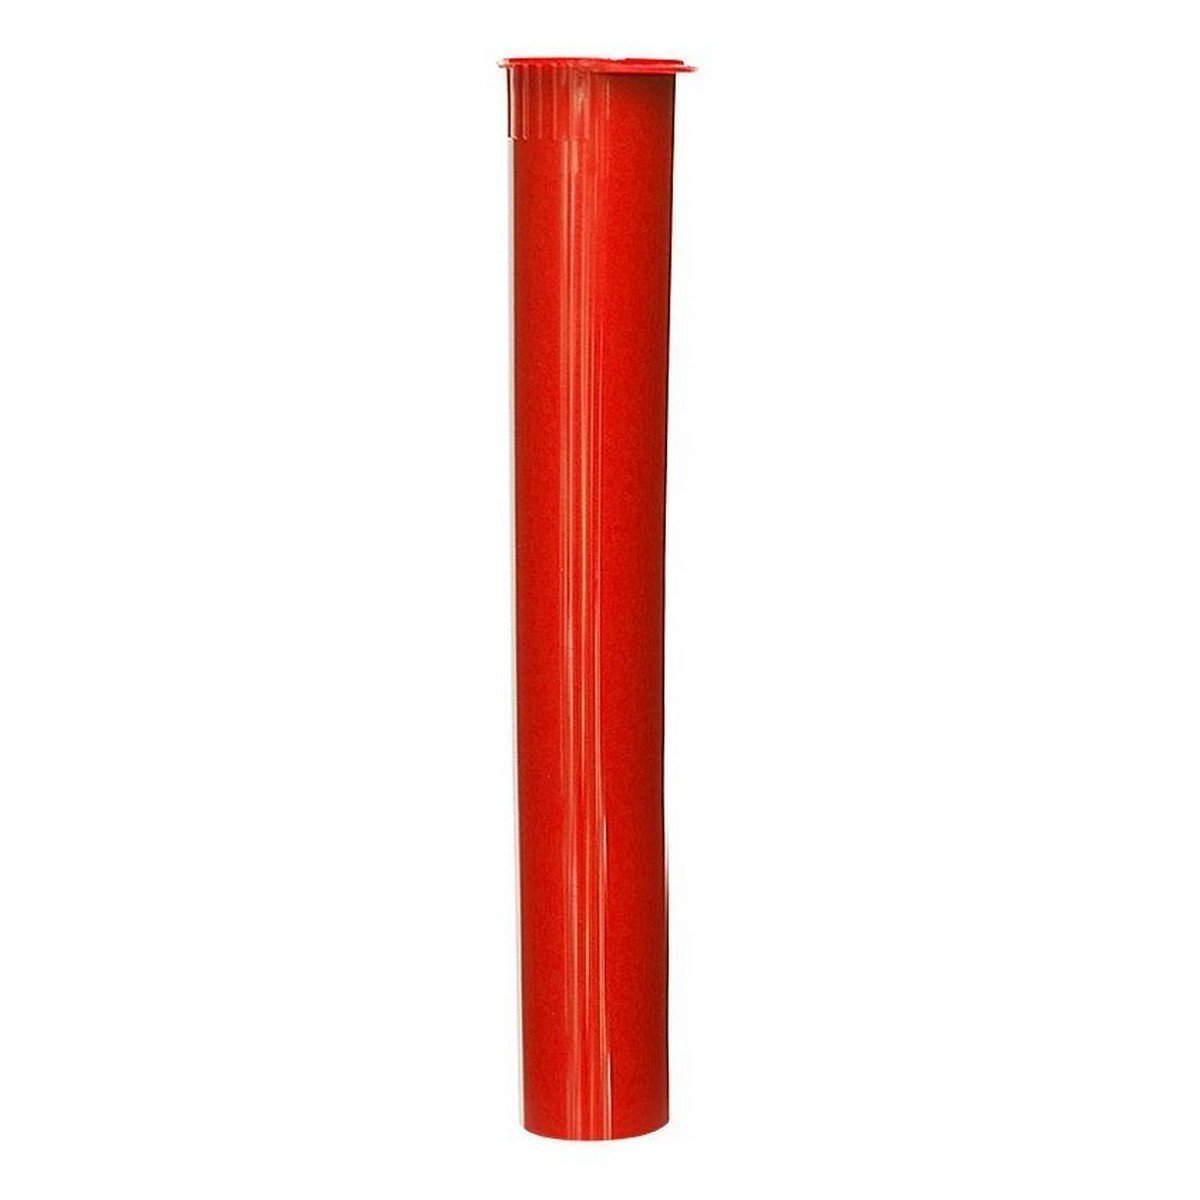 Extra Wide Squeeze Top Child-Resistant Pre-Roll Tube